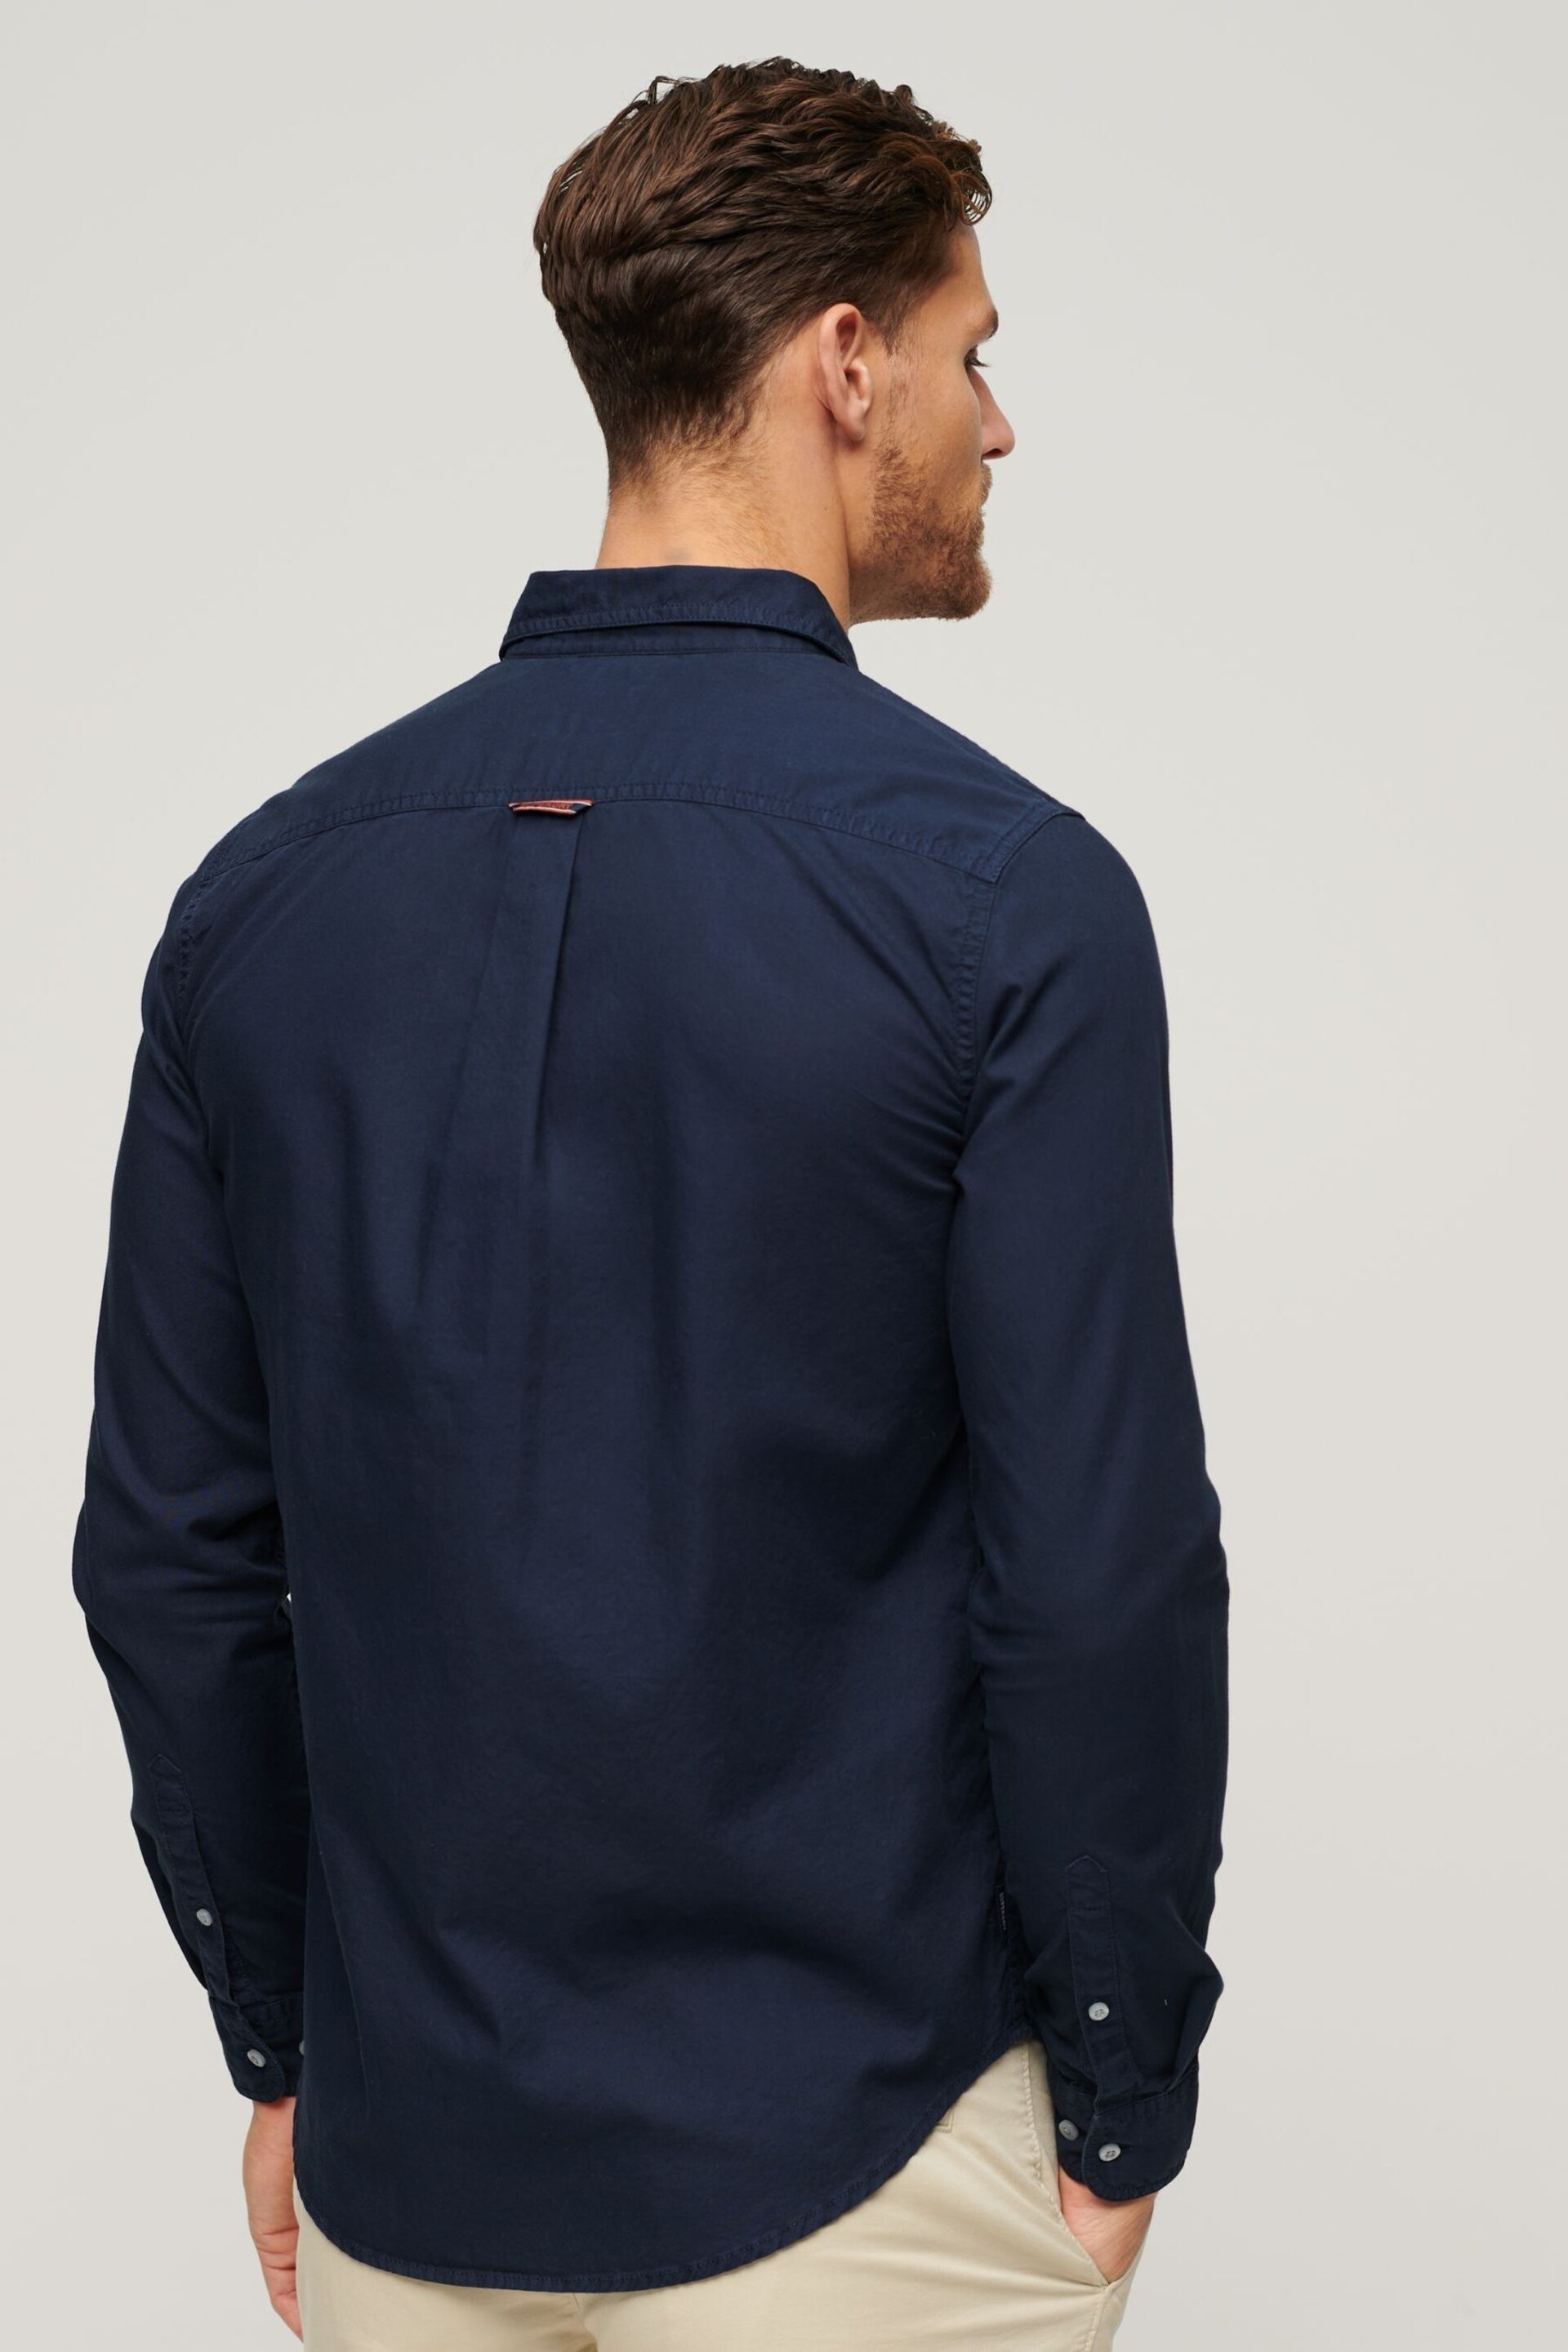 Superdry Blue Overdyed Cotton Long Sleeved Shirt - Image 3 of 6